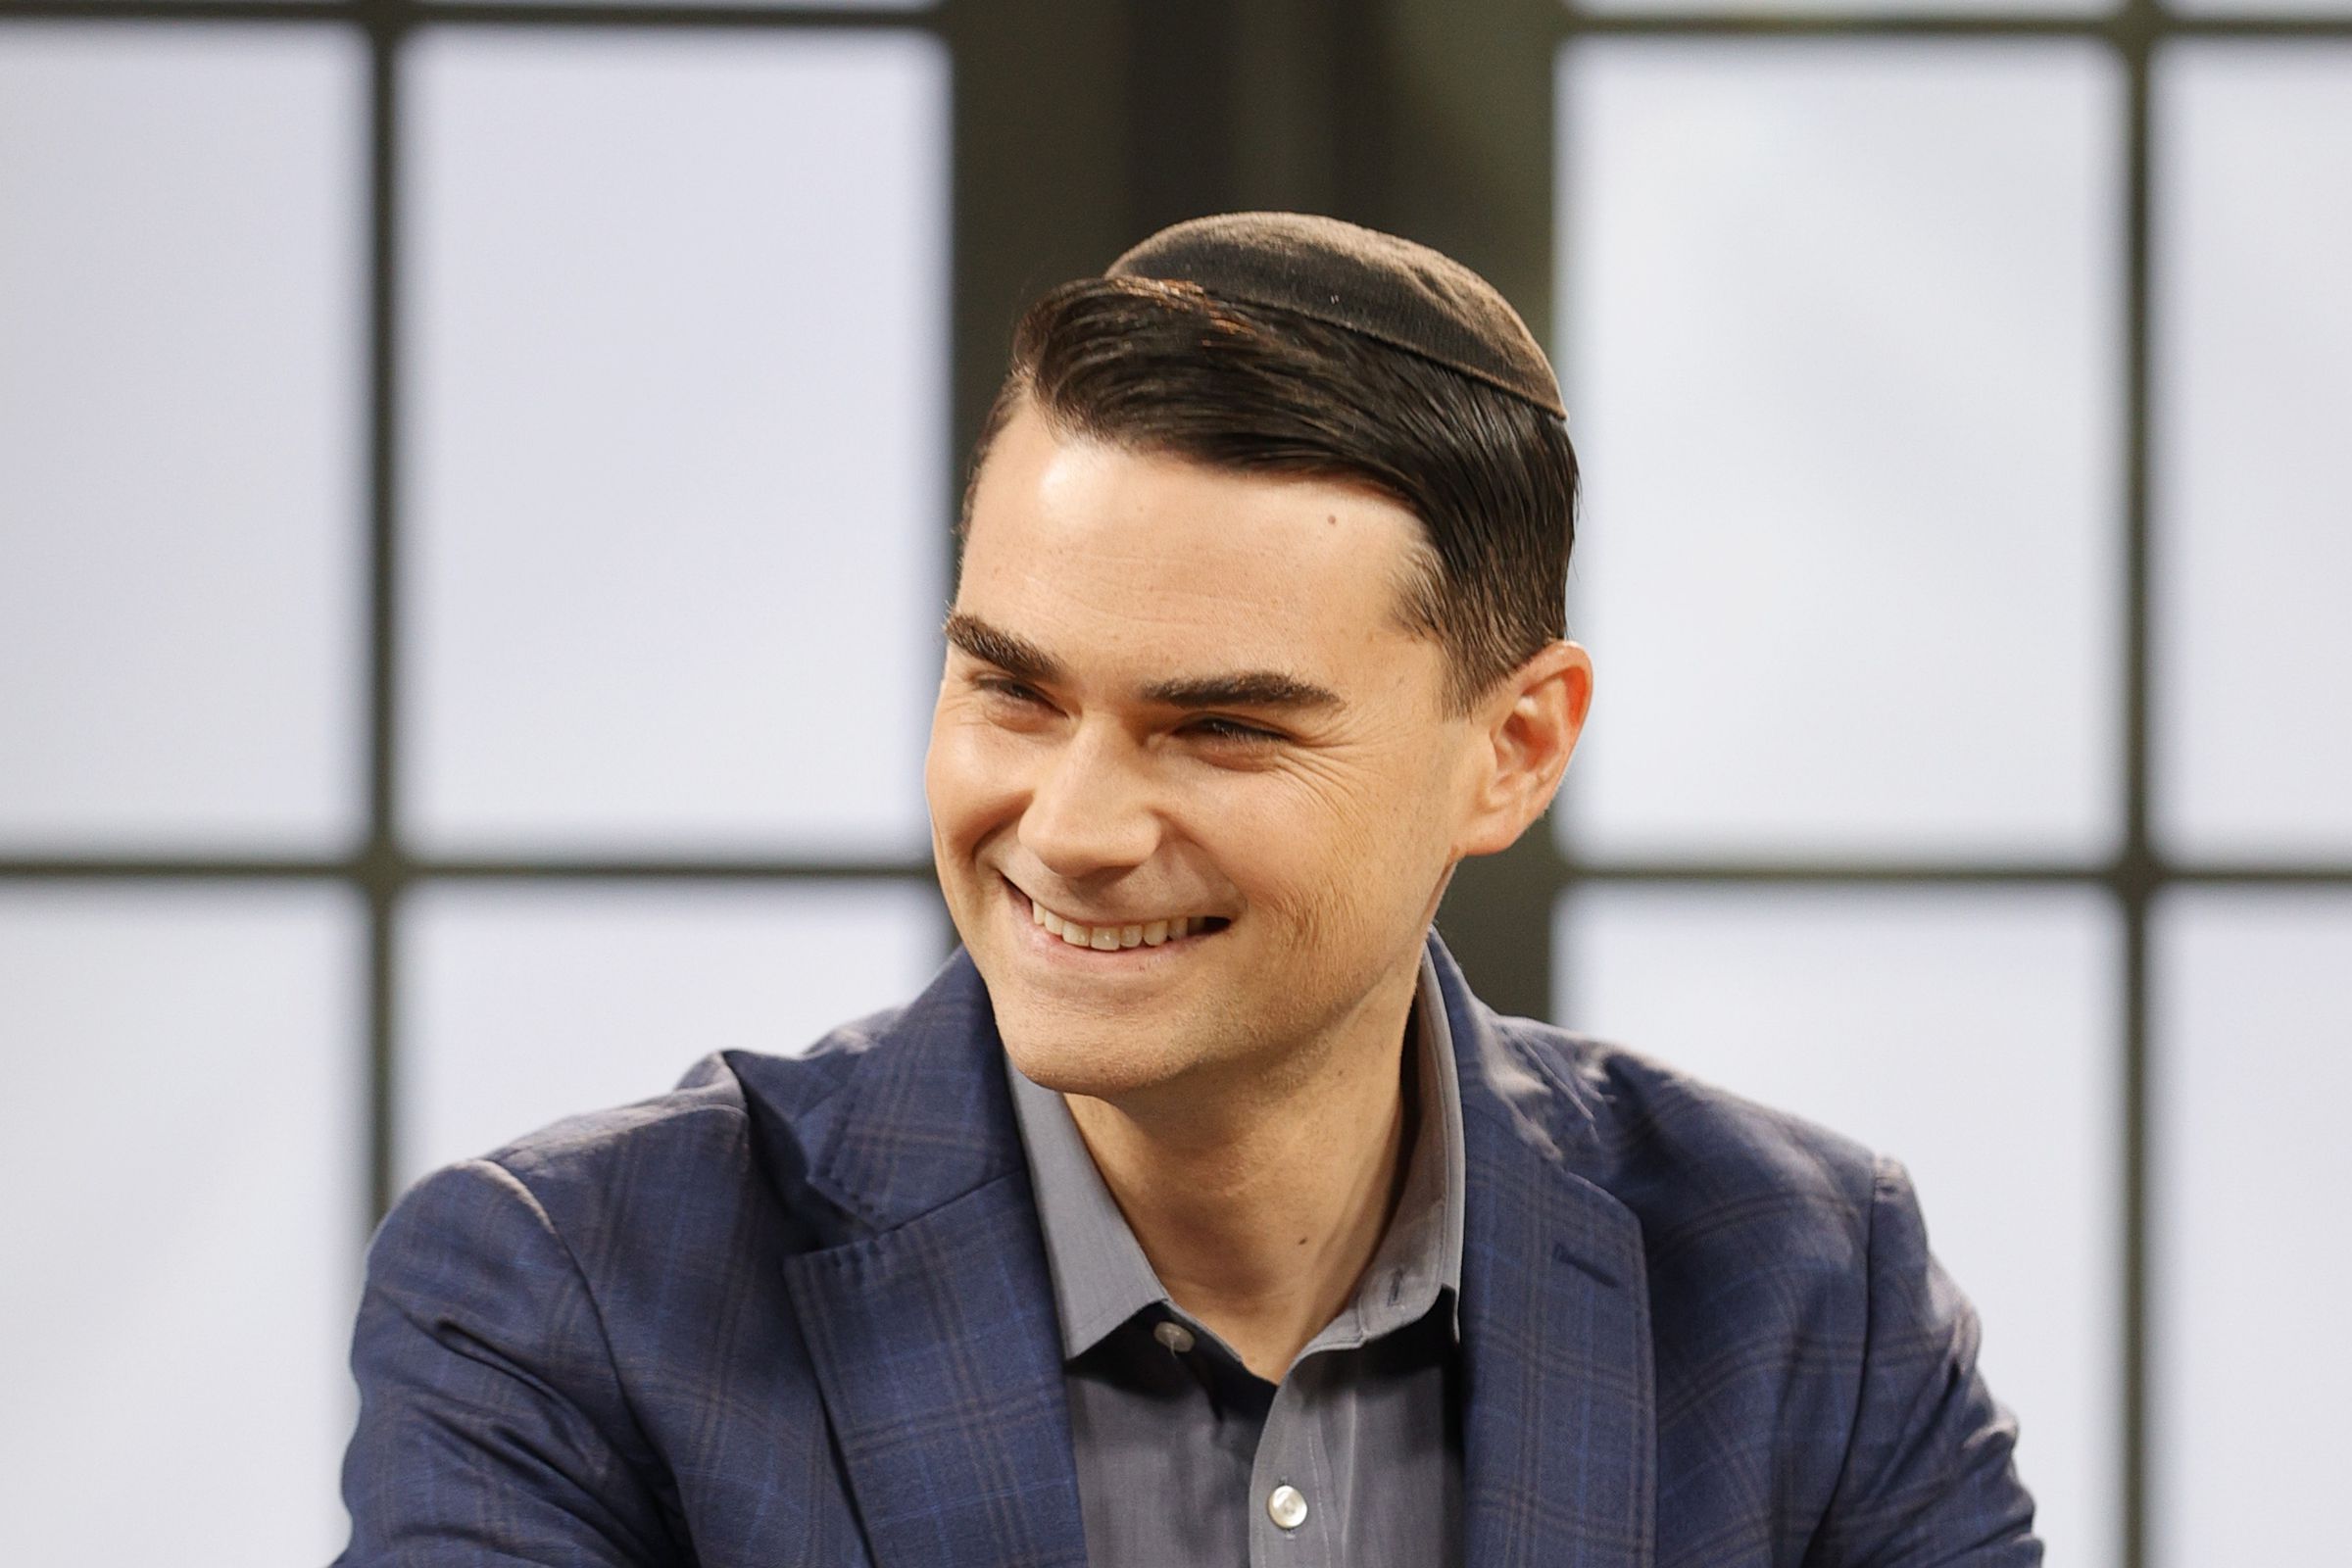 After Ben Shapiro’s appearance at Podcast Movement prompted outcry, the company that handles his podcast sales is cutting ties with the event.